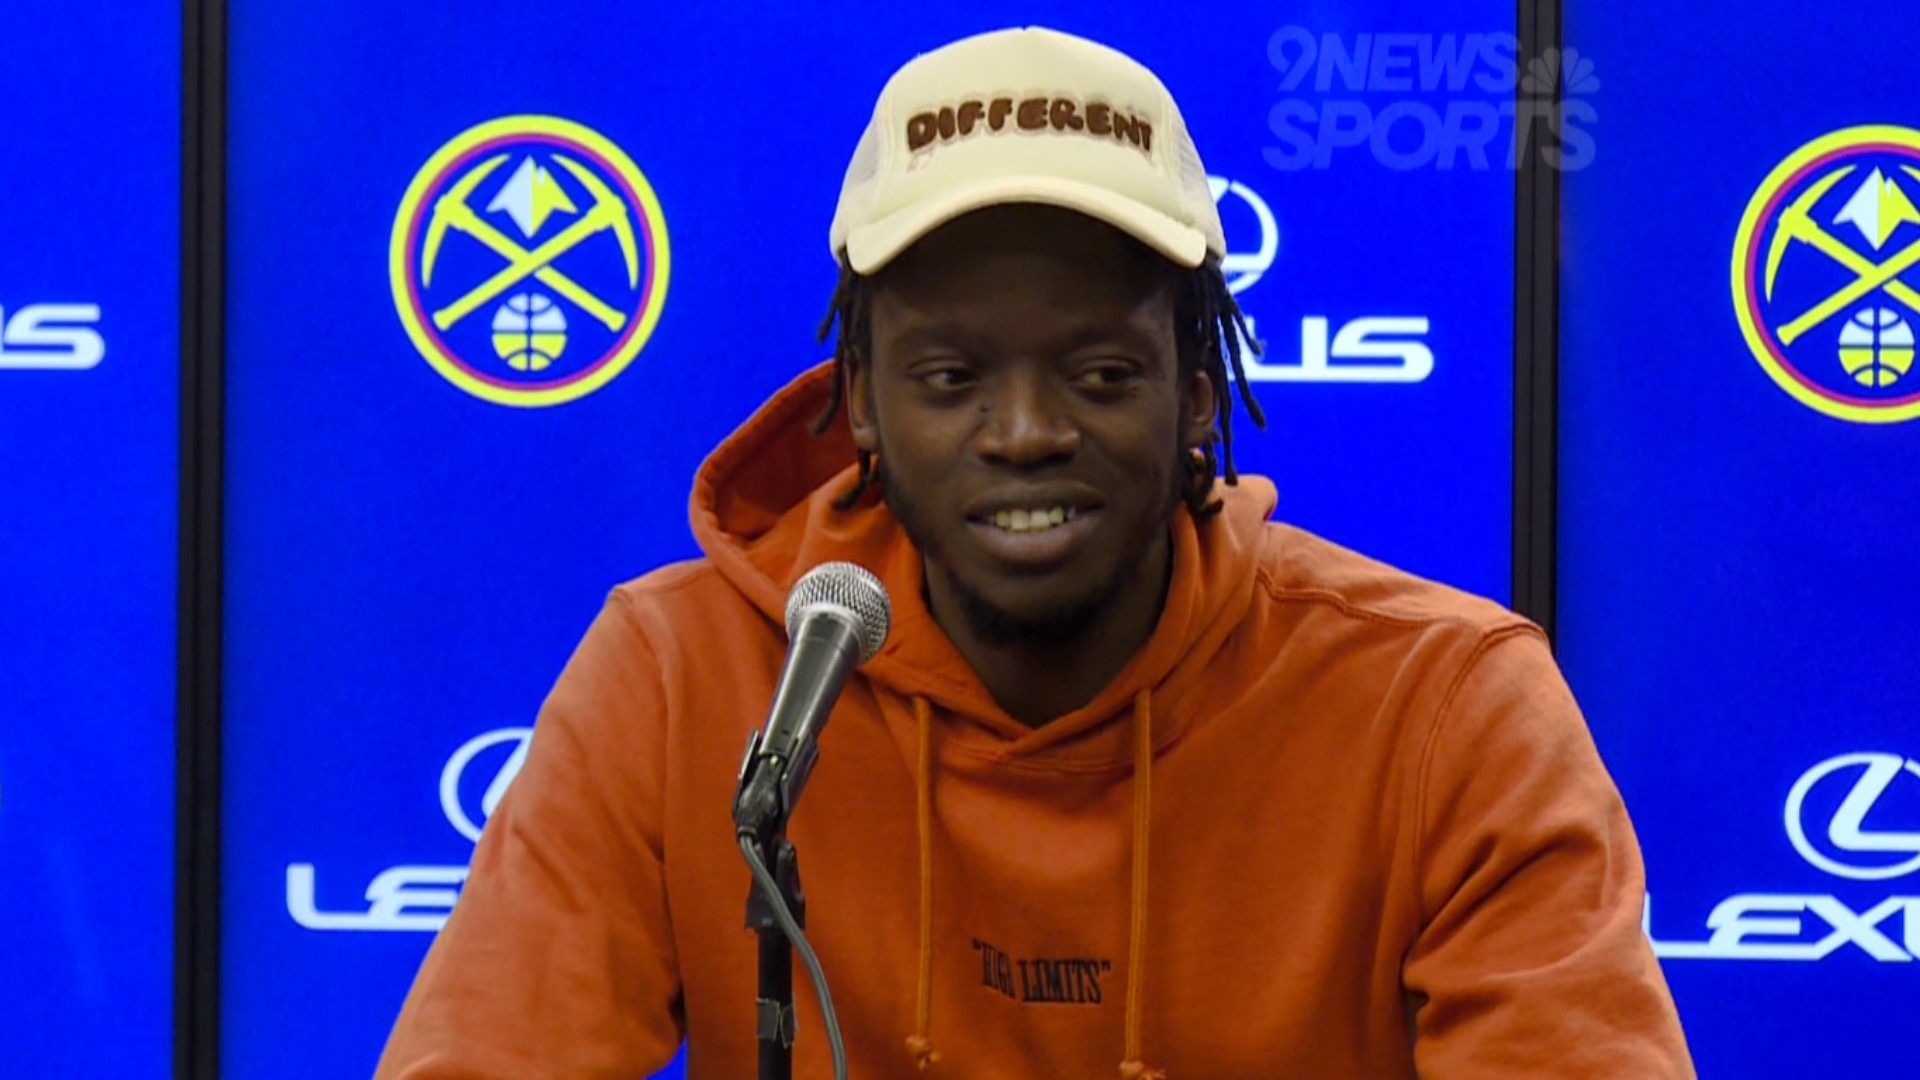 The Denver Nuggets recently signed Reggie Jackson, a 6-foot-2 guard who graduated from Palmer High School in Colorado Springs.